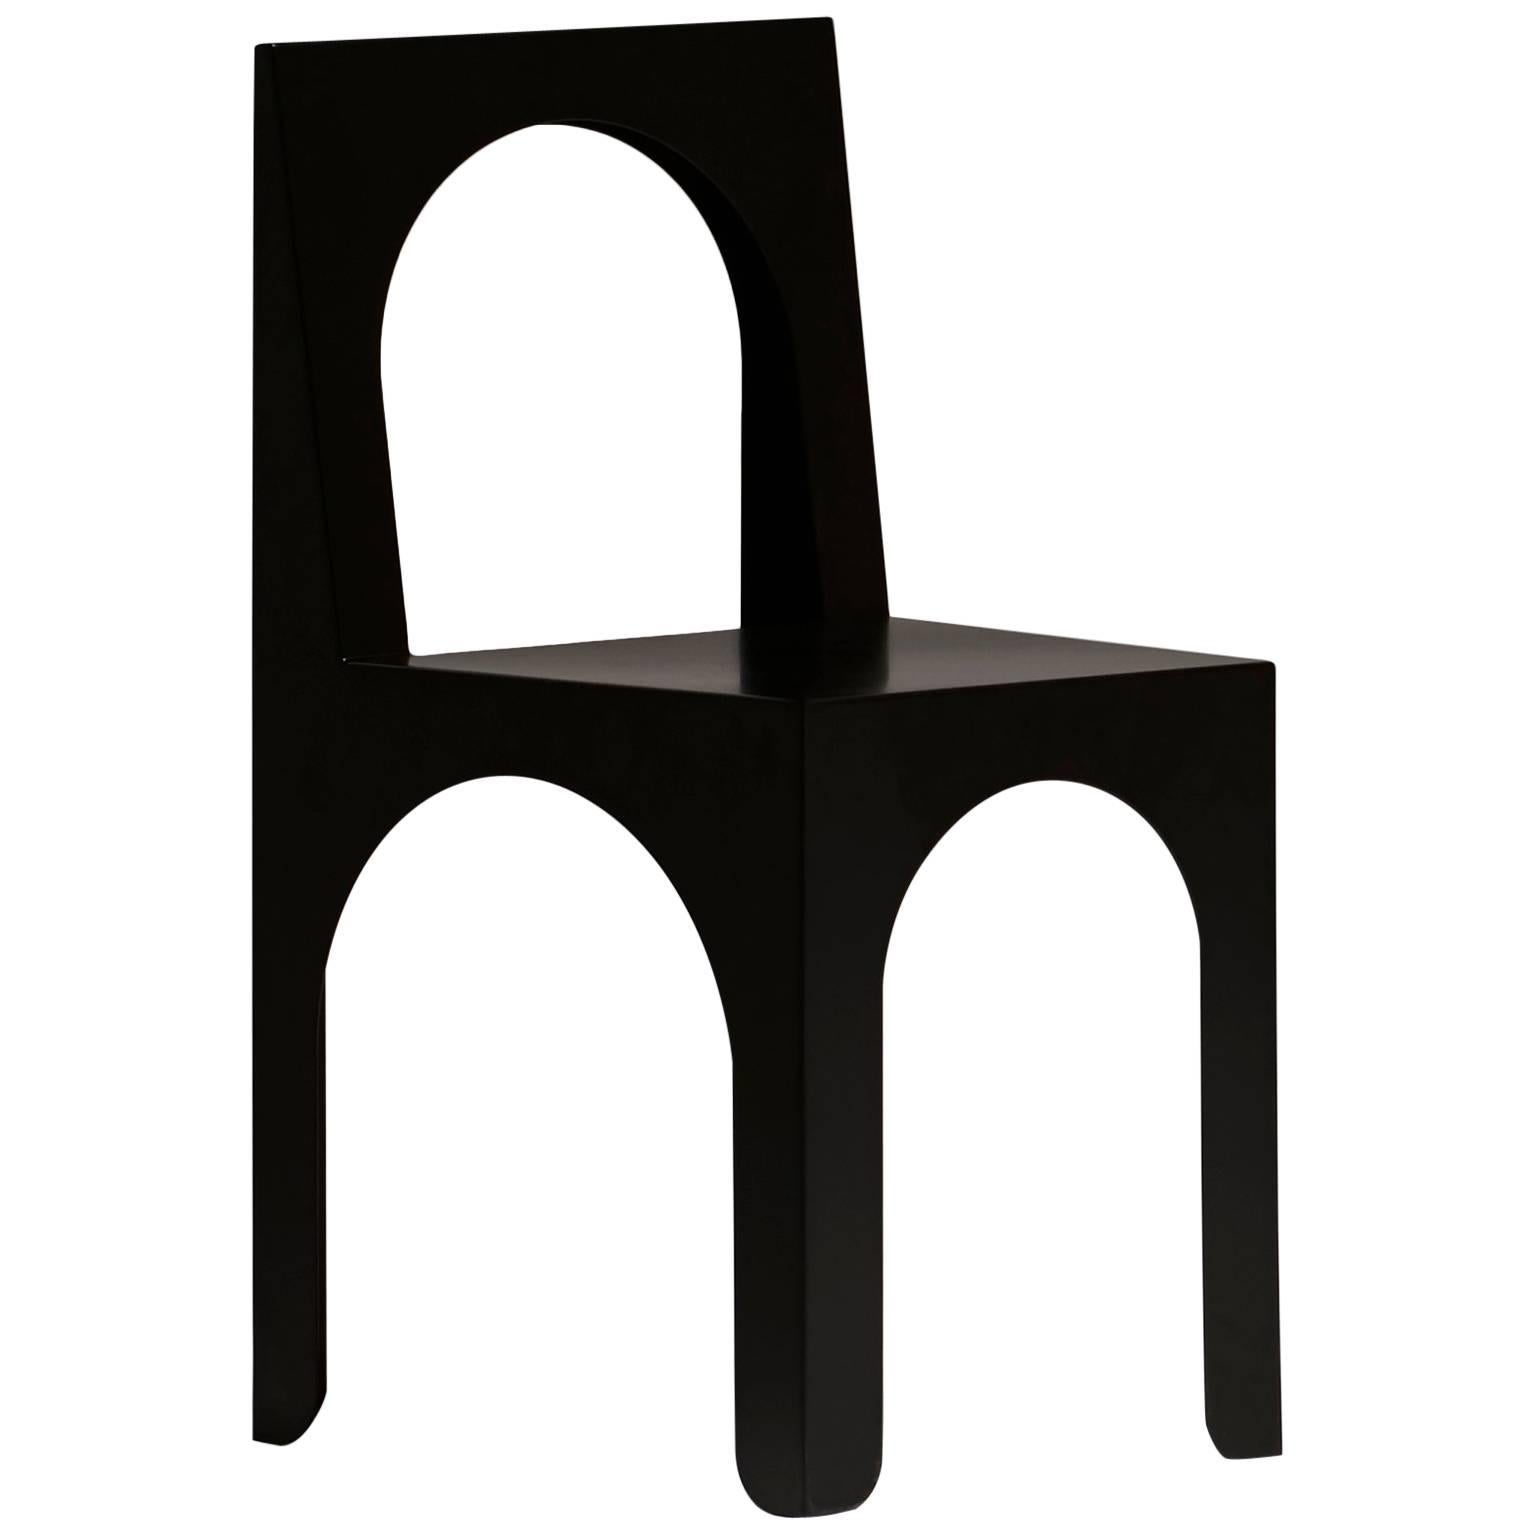 Claudia Child Chair Designed by Arquitectura-G in Black Powder-Coated Steel For Sale